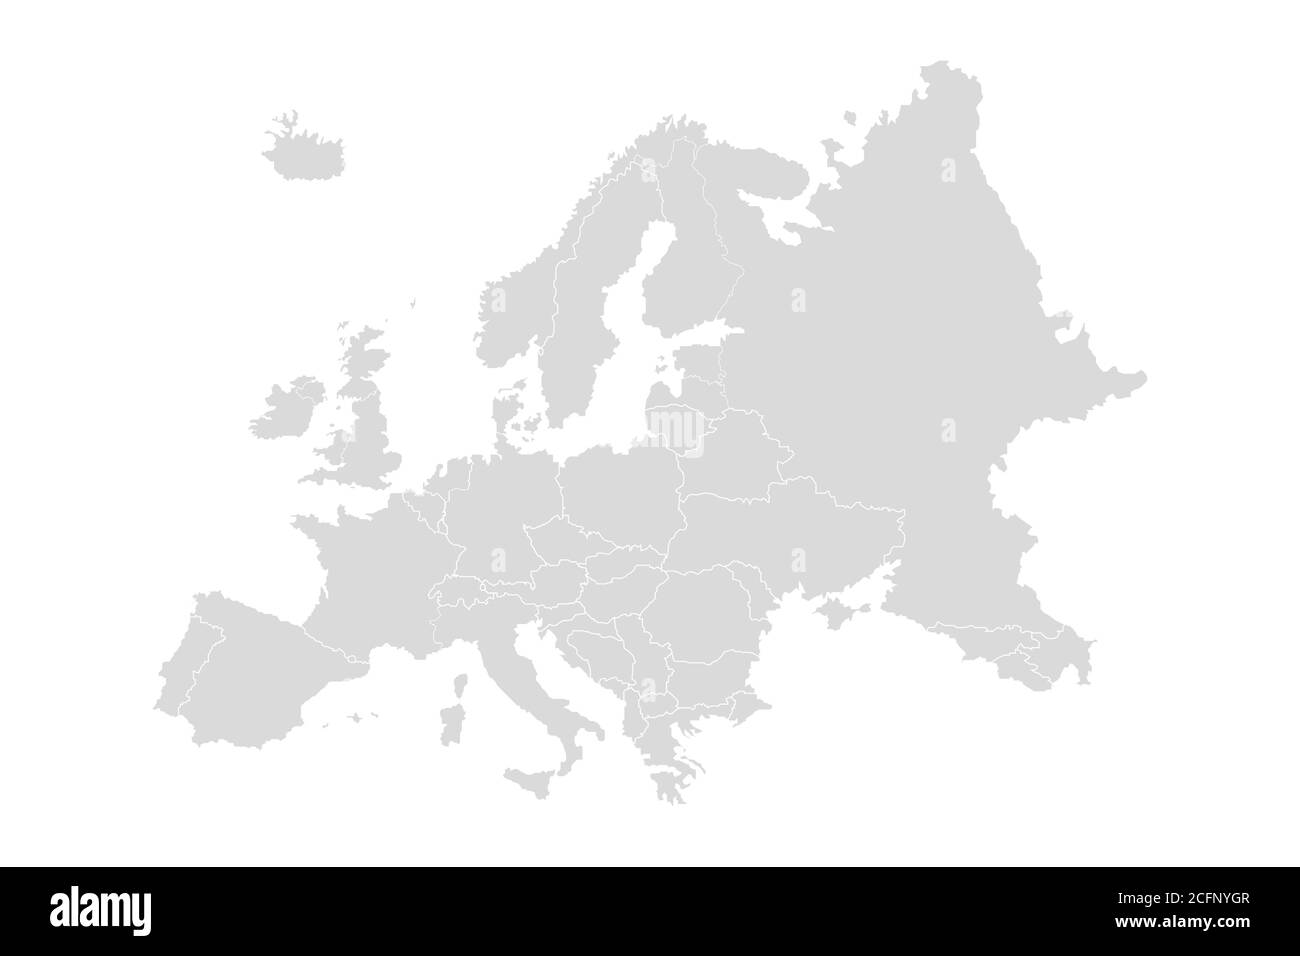 Detailed vector map of Europe Stock Vector